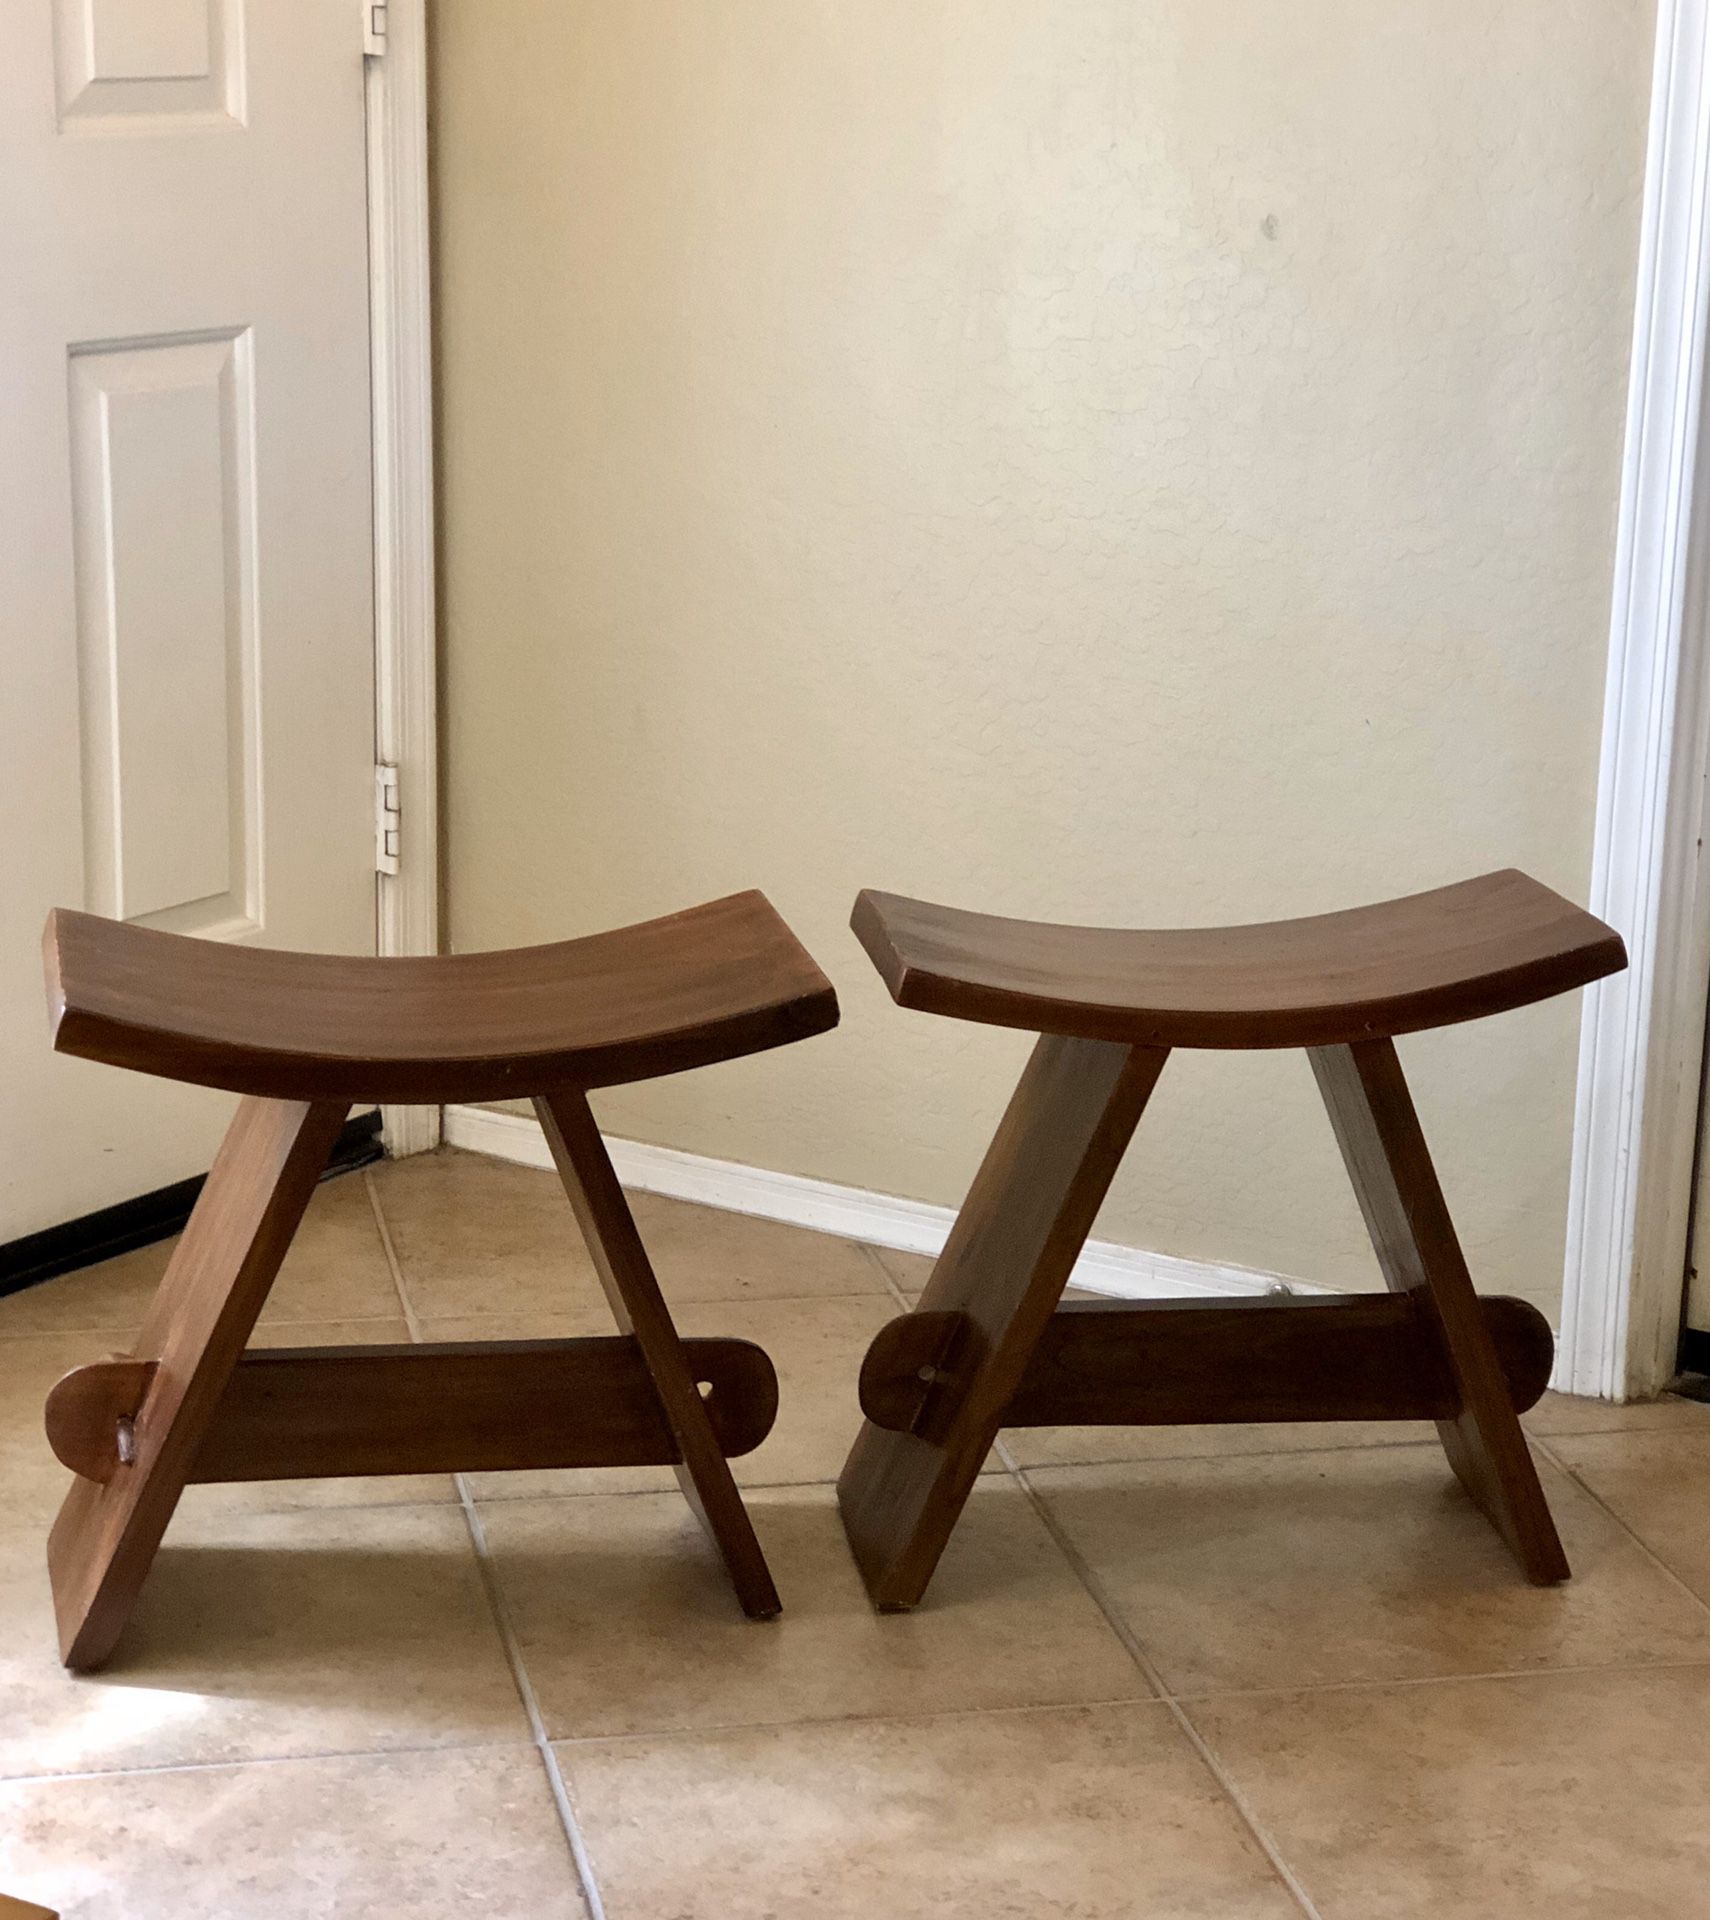 Two beautiful zen styled teak wood shower chairs. Great condition and very sturdy! $100 for both.